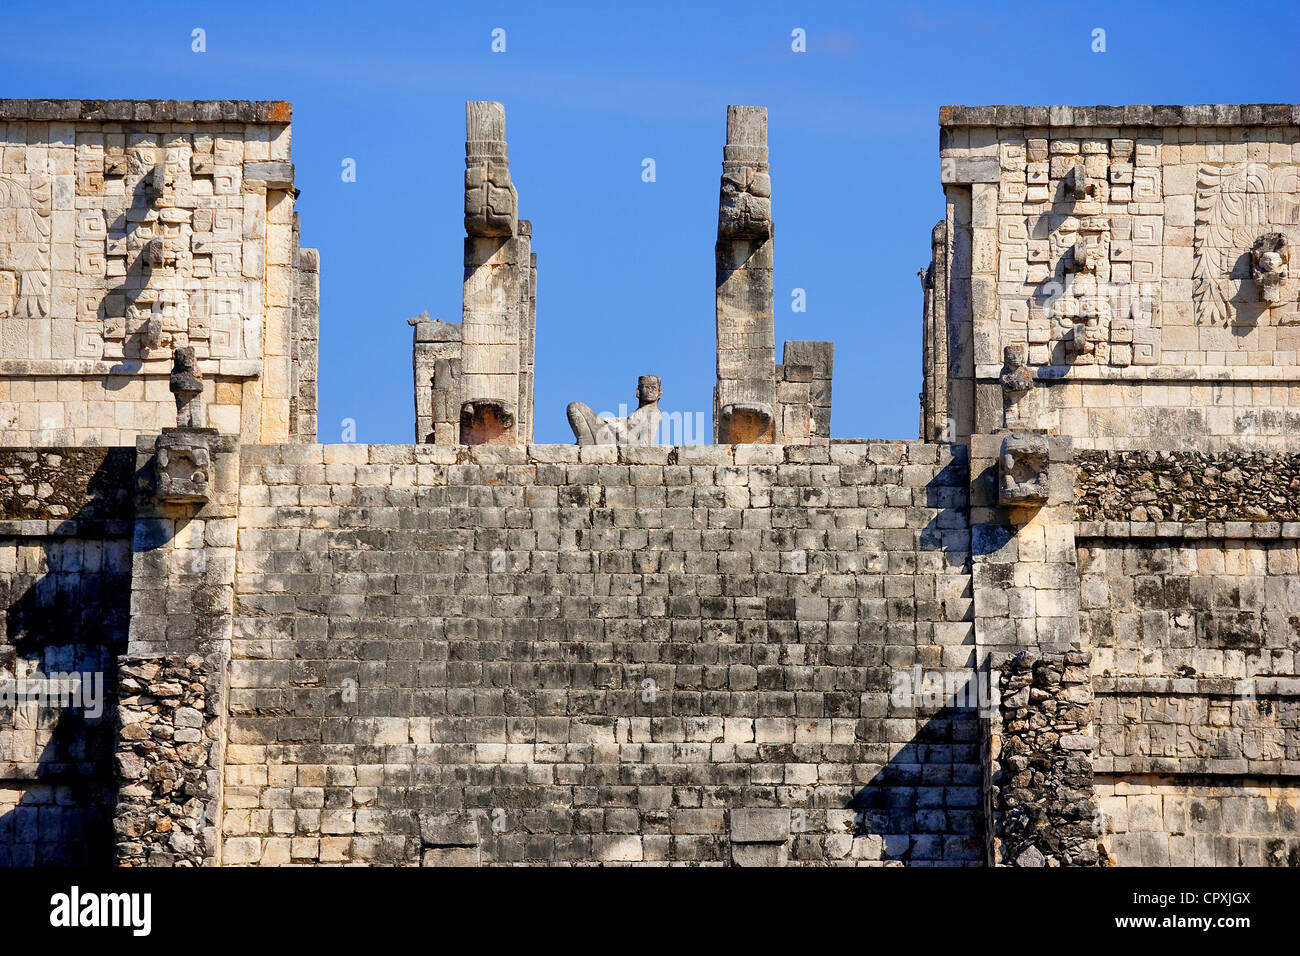 Mexico Yucatan State archaeological site of Chichen Itza listed as World Heritage by UNESCO Temple of the Warriors Chac Mool Stock Photo